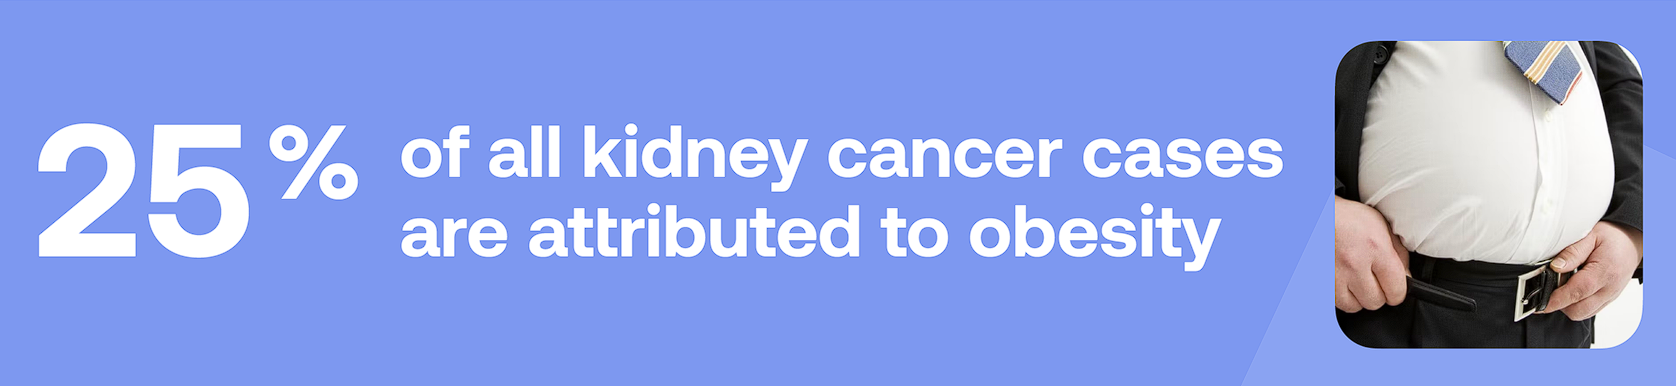 25% of all kidney cancer cases are attributed to obesity